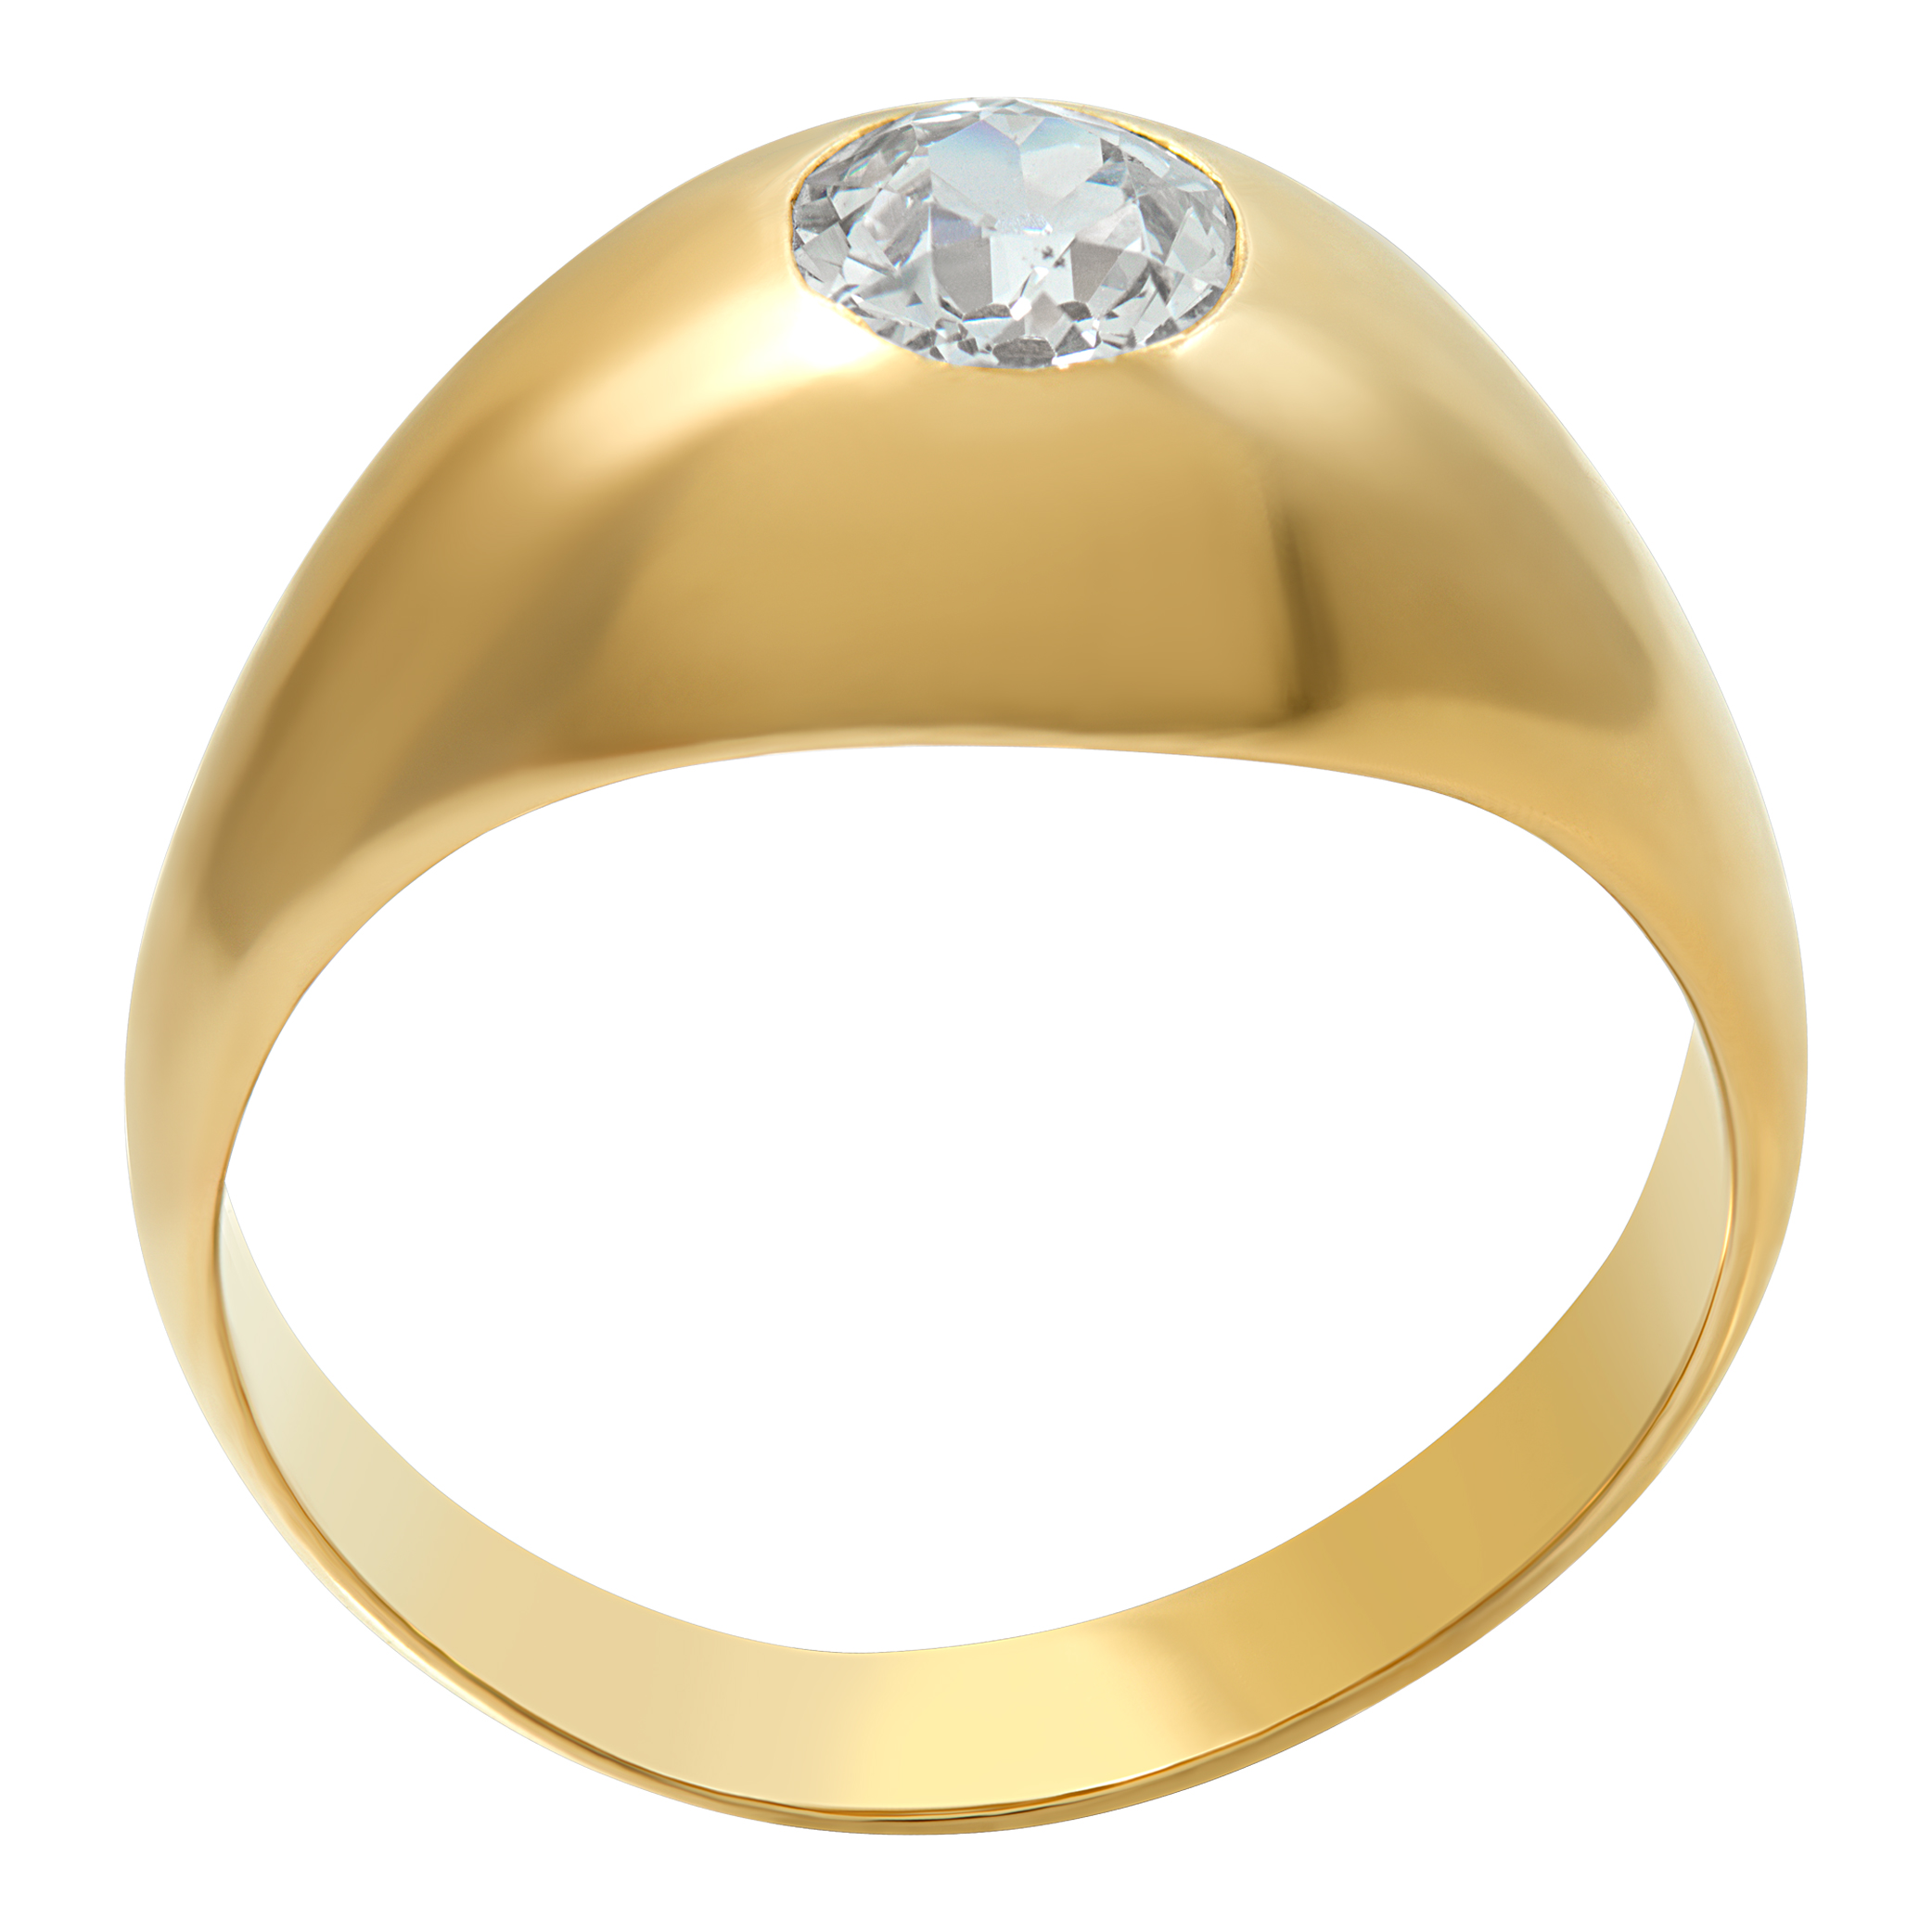 Diamond ring in 14k with approx. 0.75 carat H-I color, SI clarity